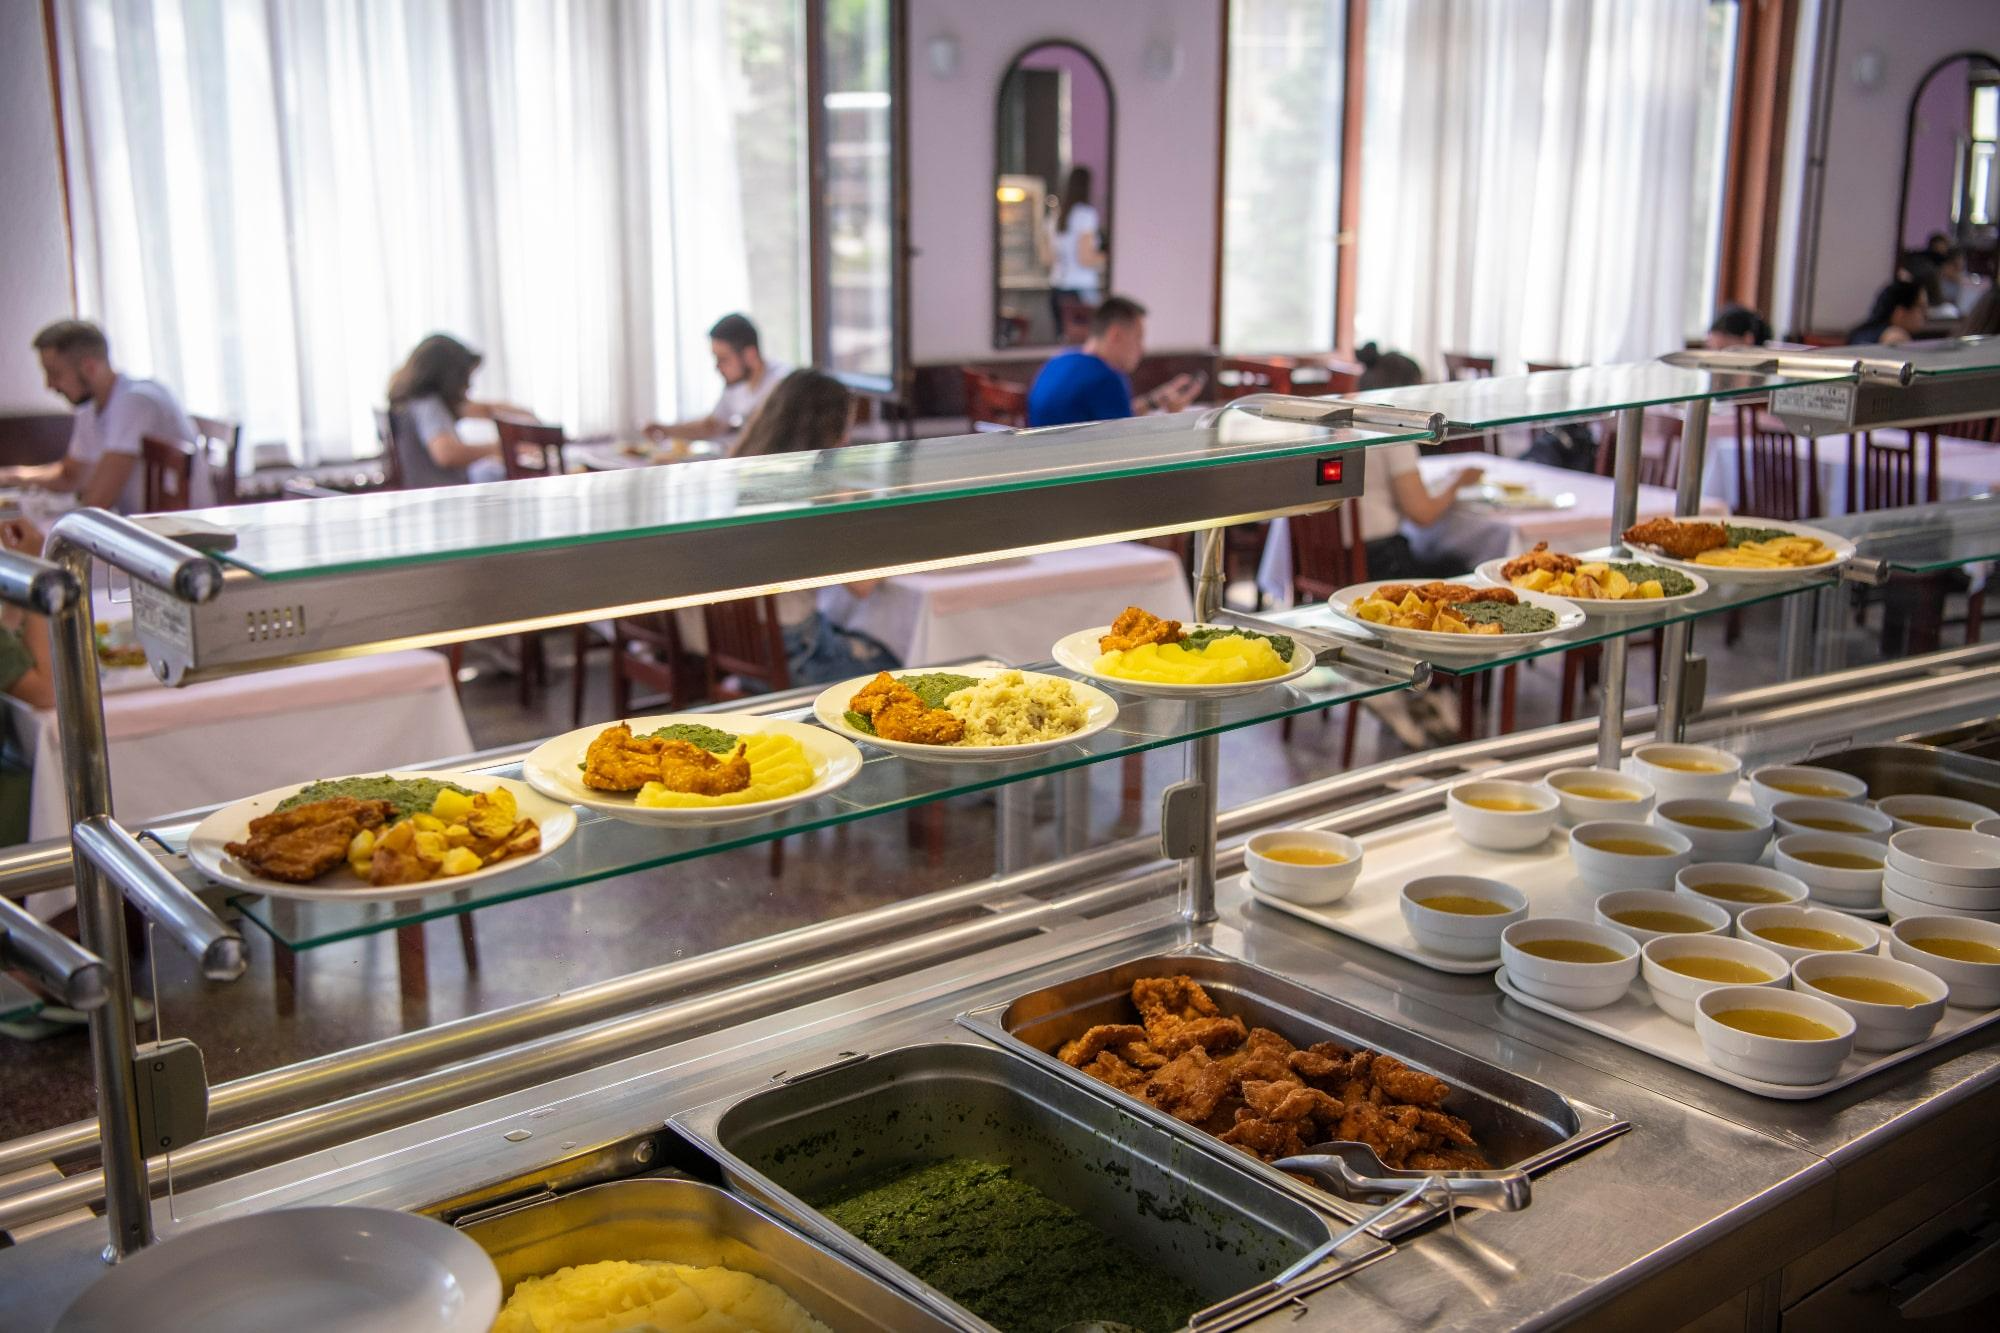 Students being served meal in school canteen.